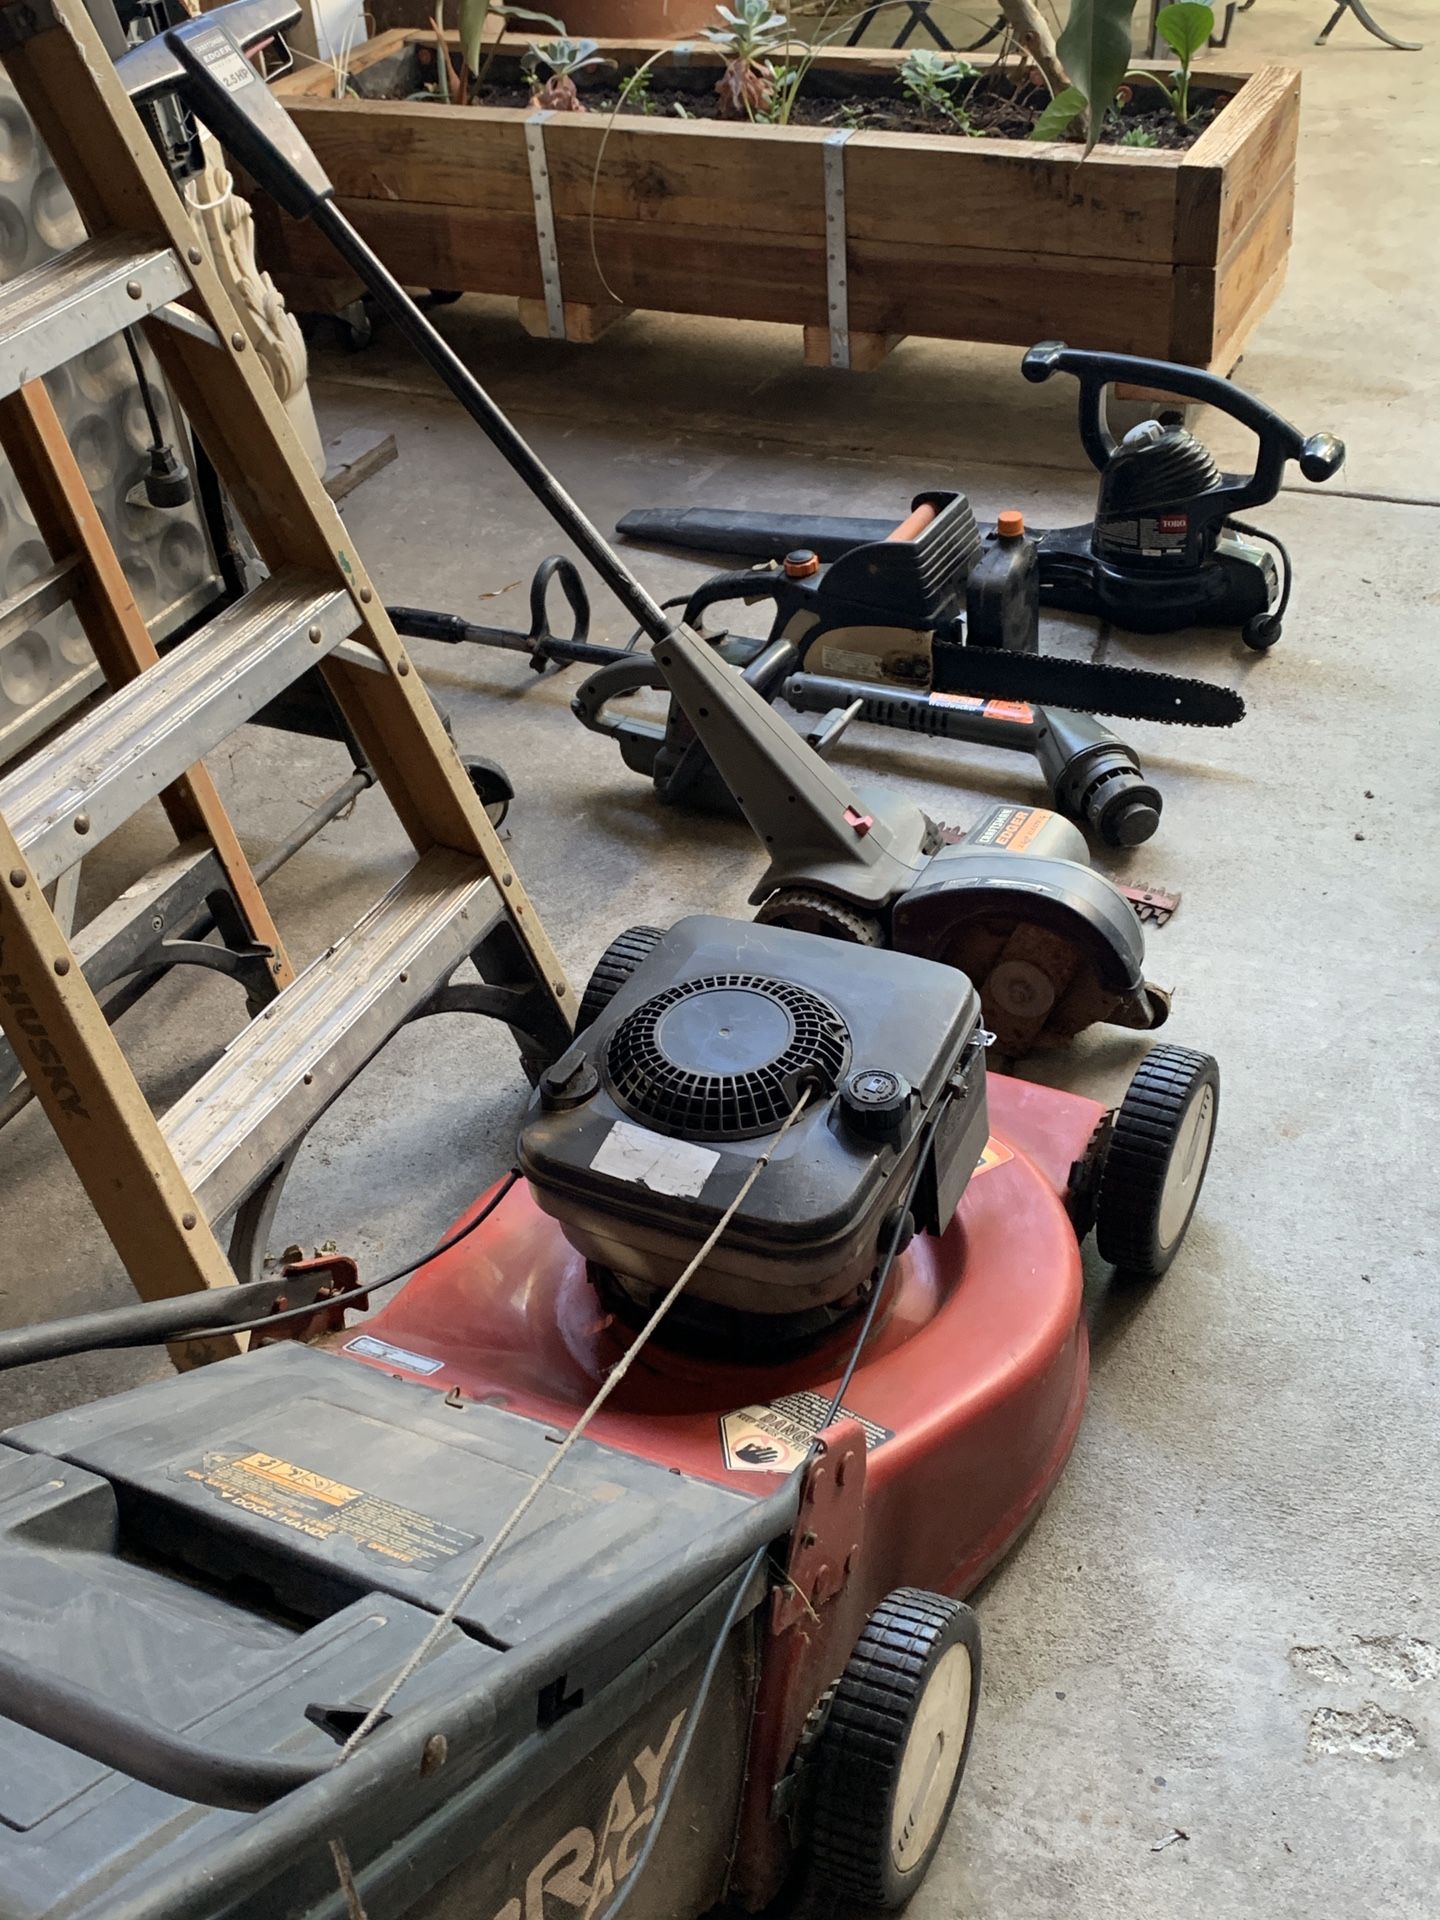 Garden Tools 7 Items all in Working Condition Gardener Set Lawnmower GAS, Electric Edger, Weed Wacker, Blower, Ladder, Lawn Edger , and 2